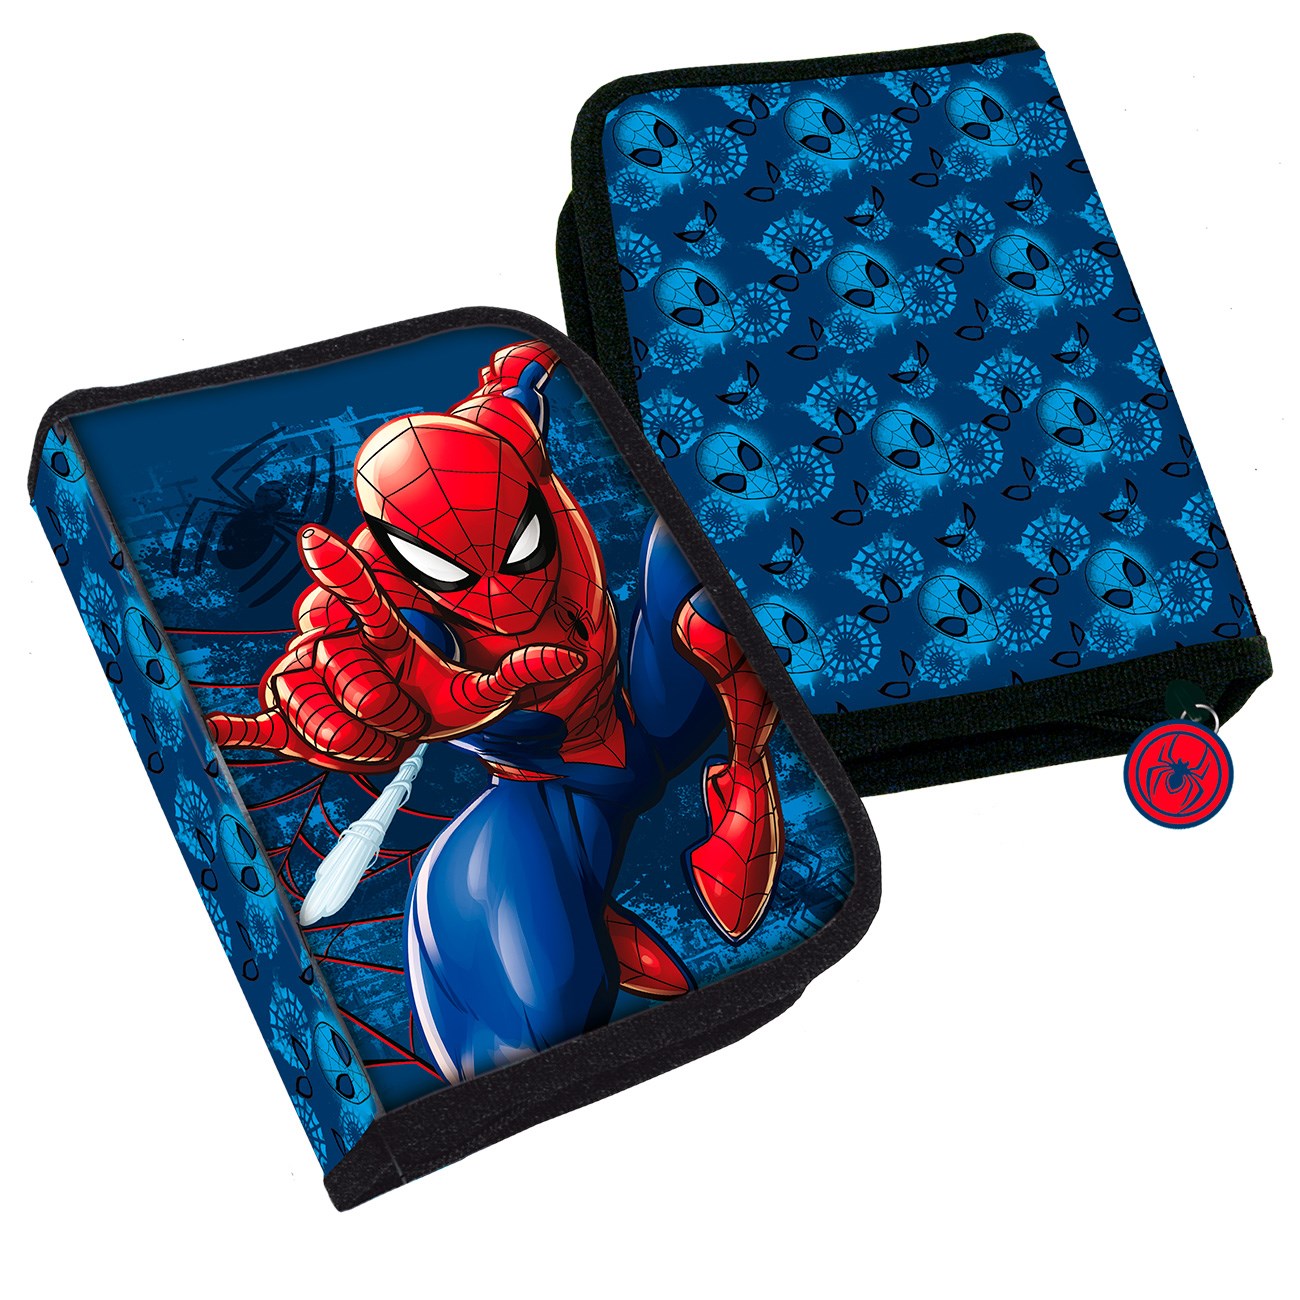 Euromic Spiderman Filled Pencil Housing 1 Compartment